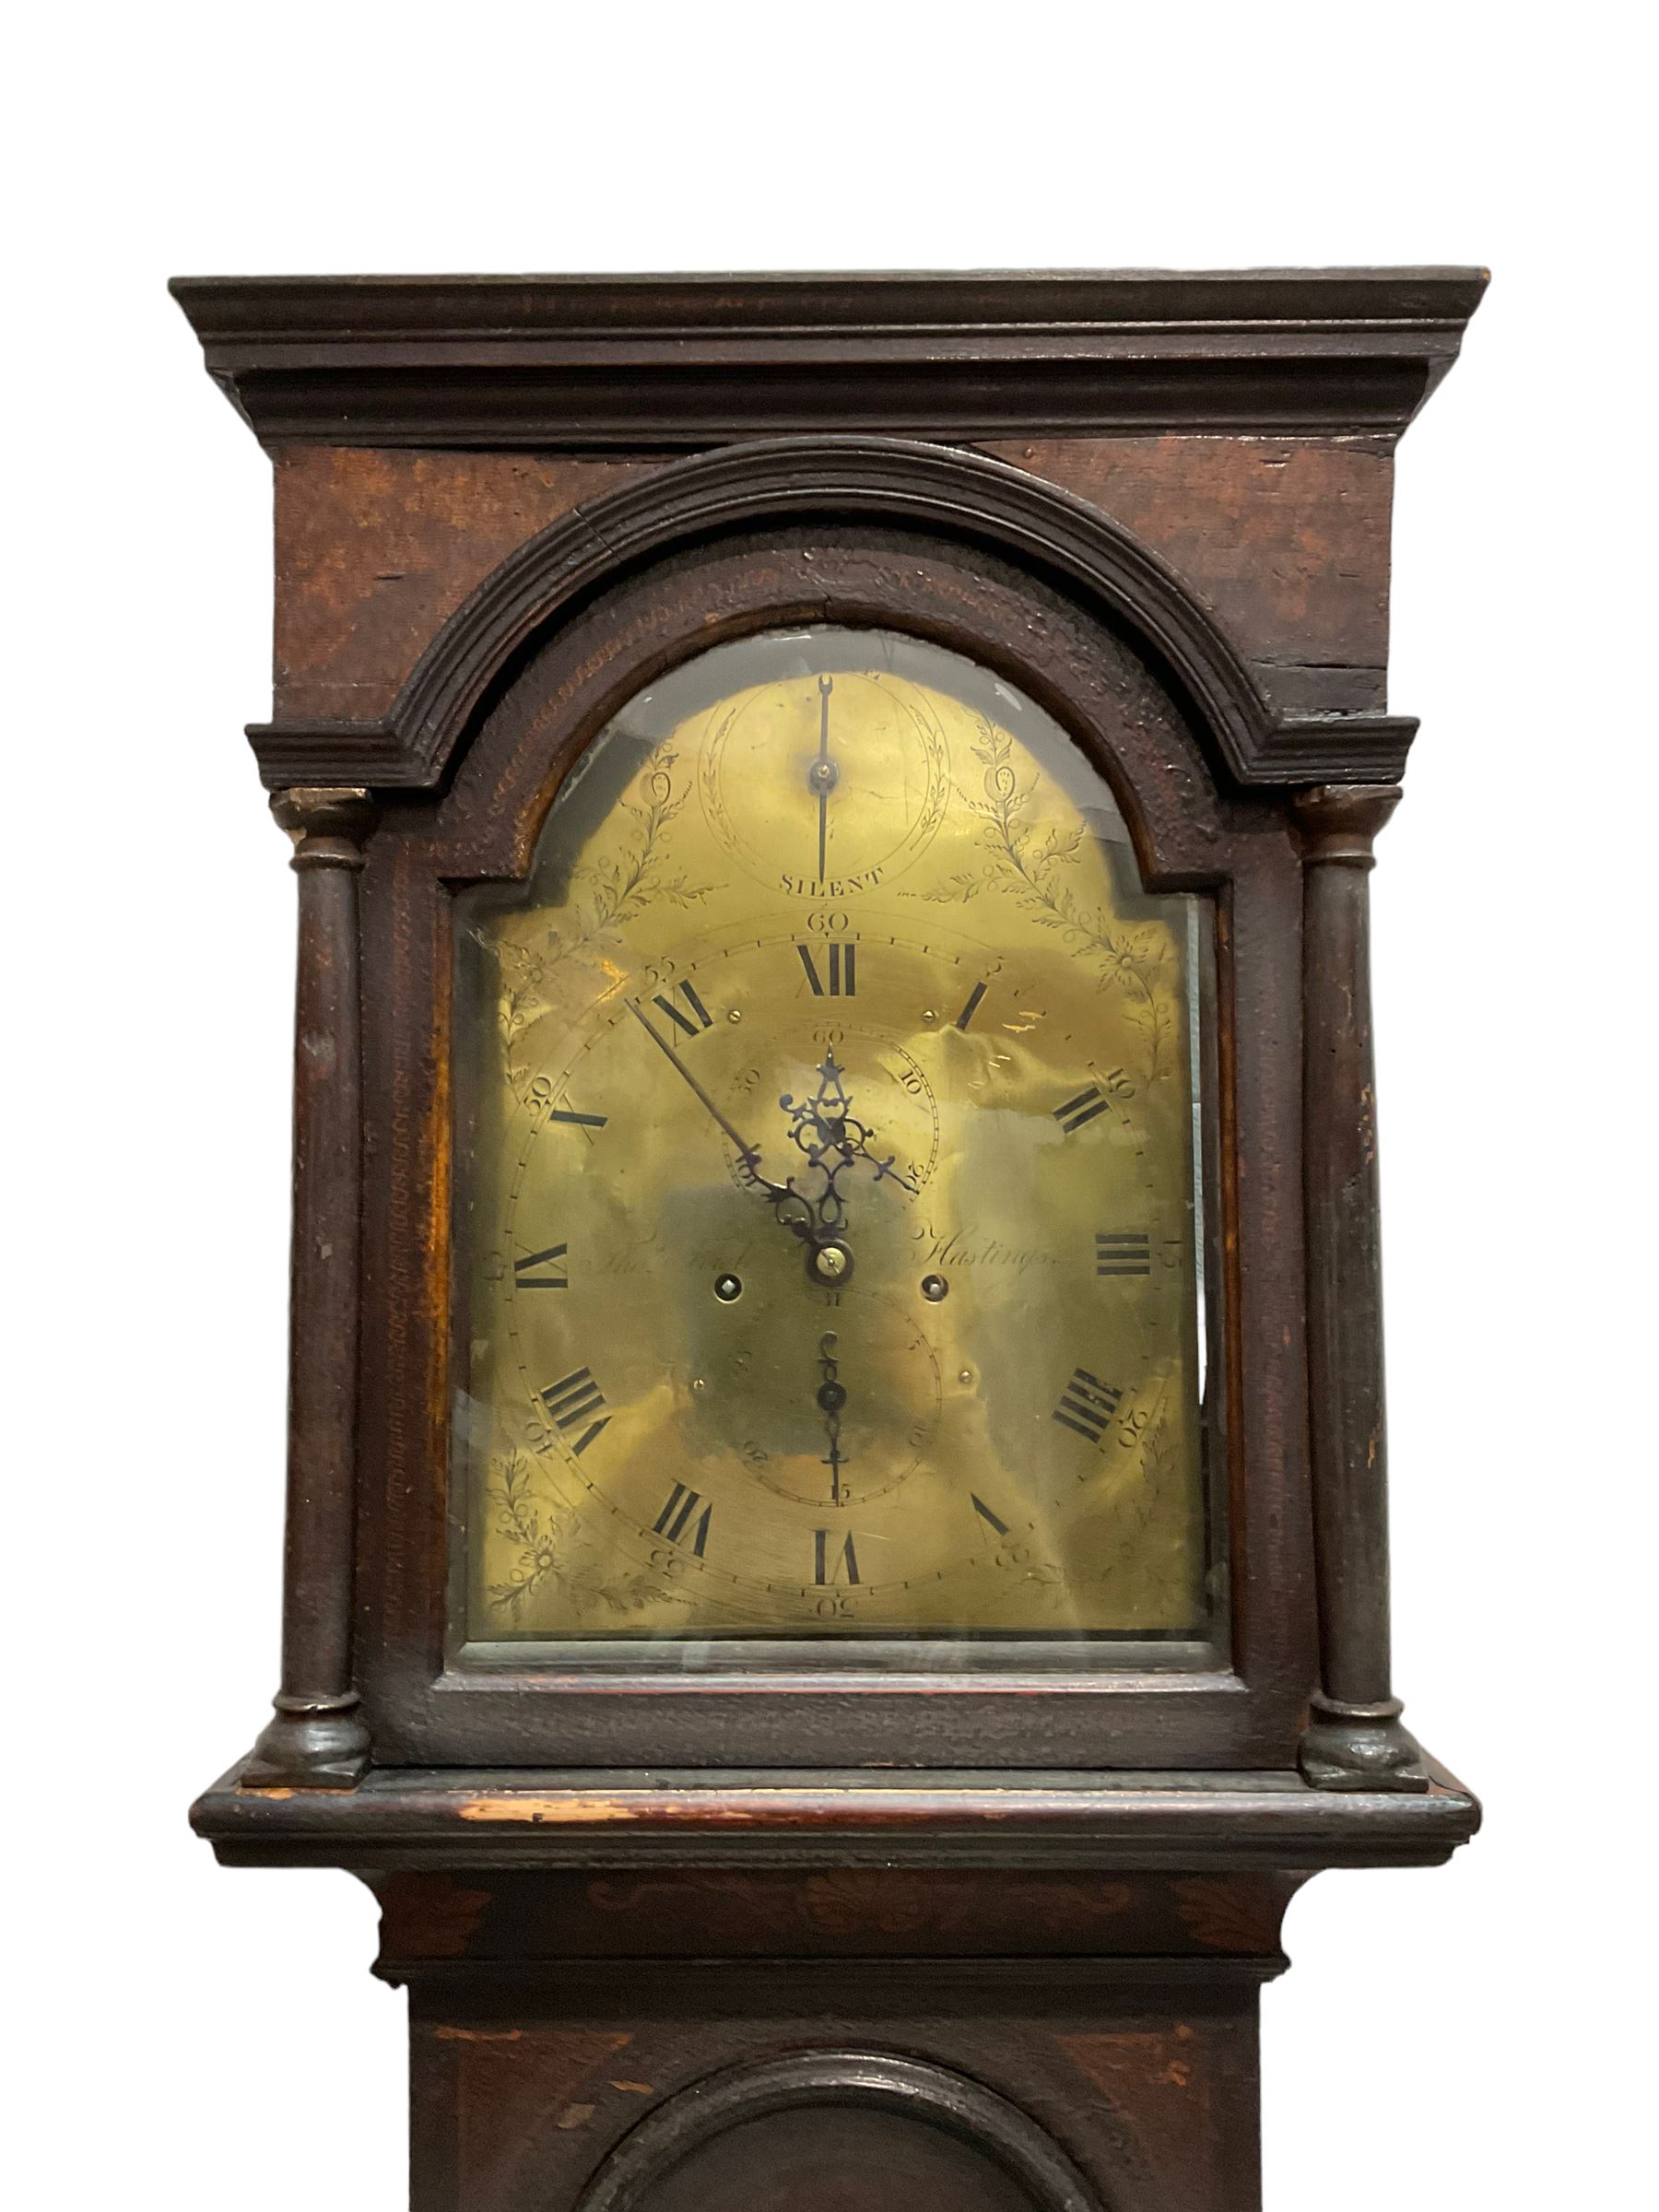 Fowle of Hastings - mid-18th century 8-day black-lacquer longcase clock - Image 4 of 8